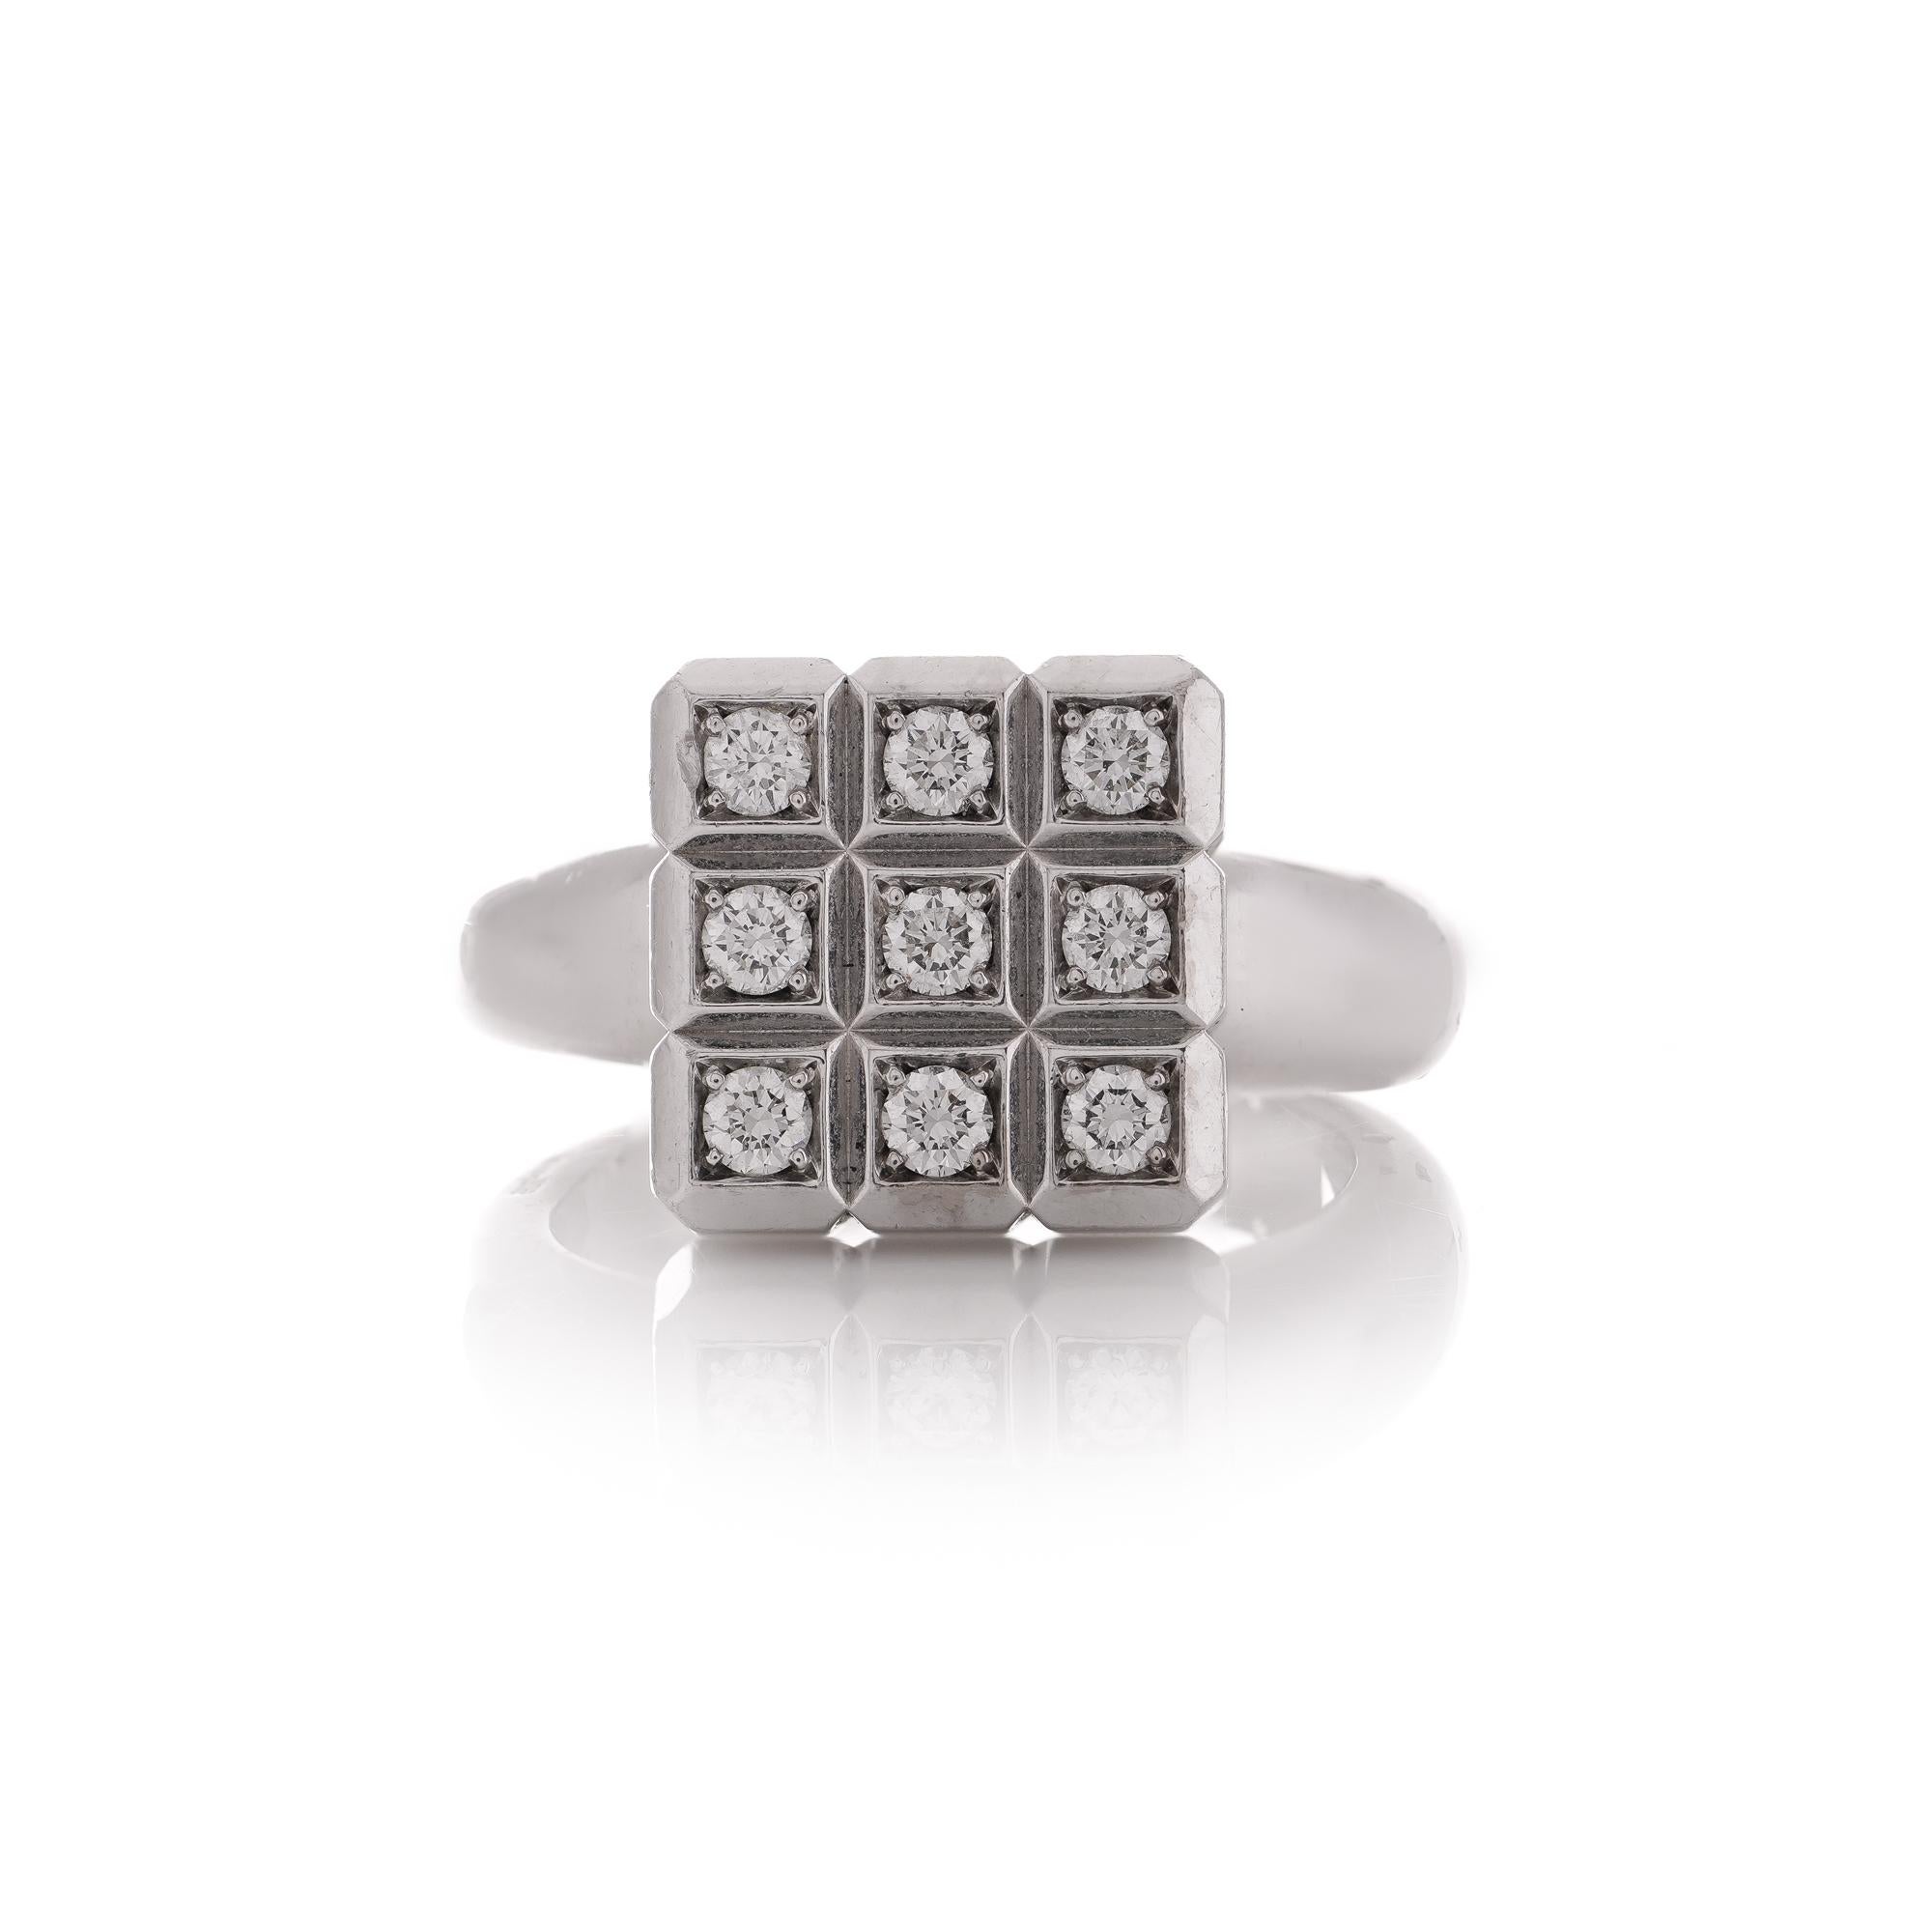 Chopard 18kt white gold ring from the Ice Cube collection features a front adorned with 9 round brilliant diamonds, divided into 9 cubes. Additionally, the front can be twisted and rotated for added versatility.

The ring is hallmarked with 750